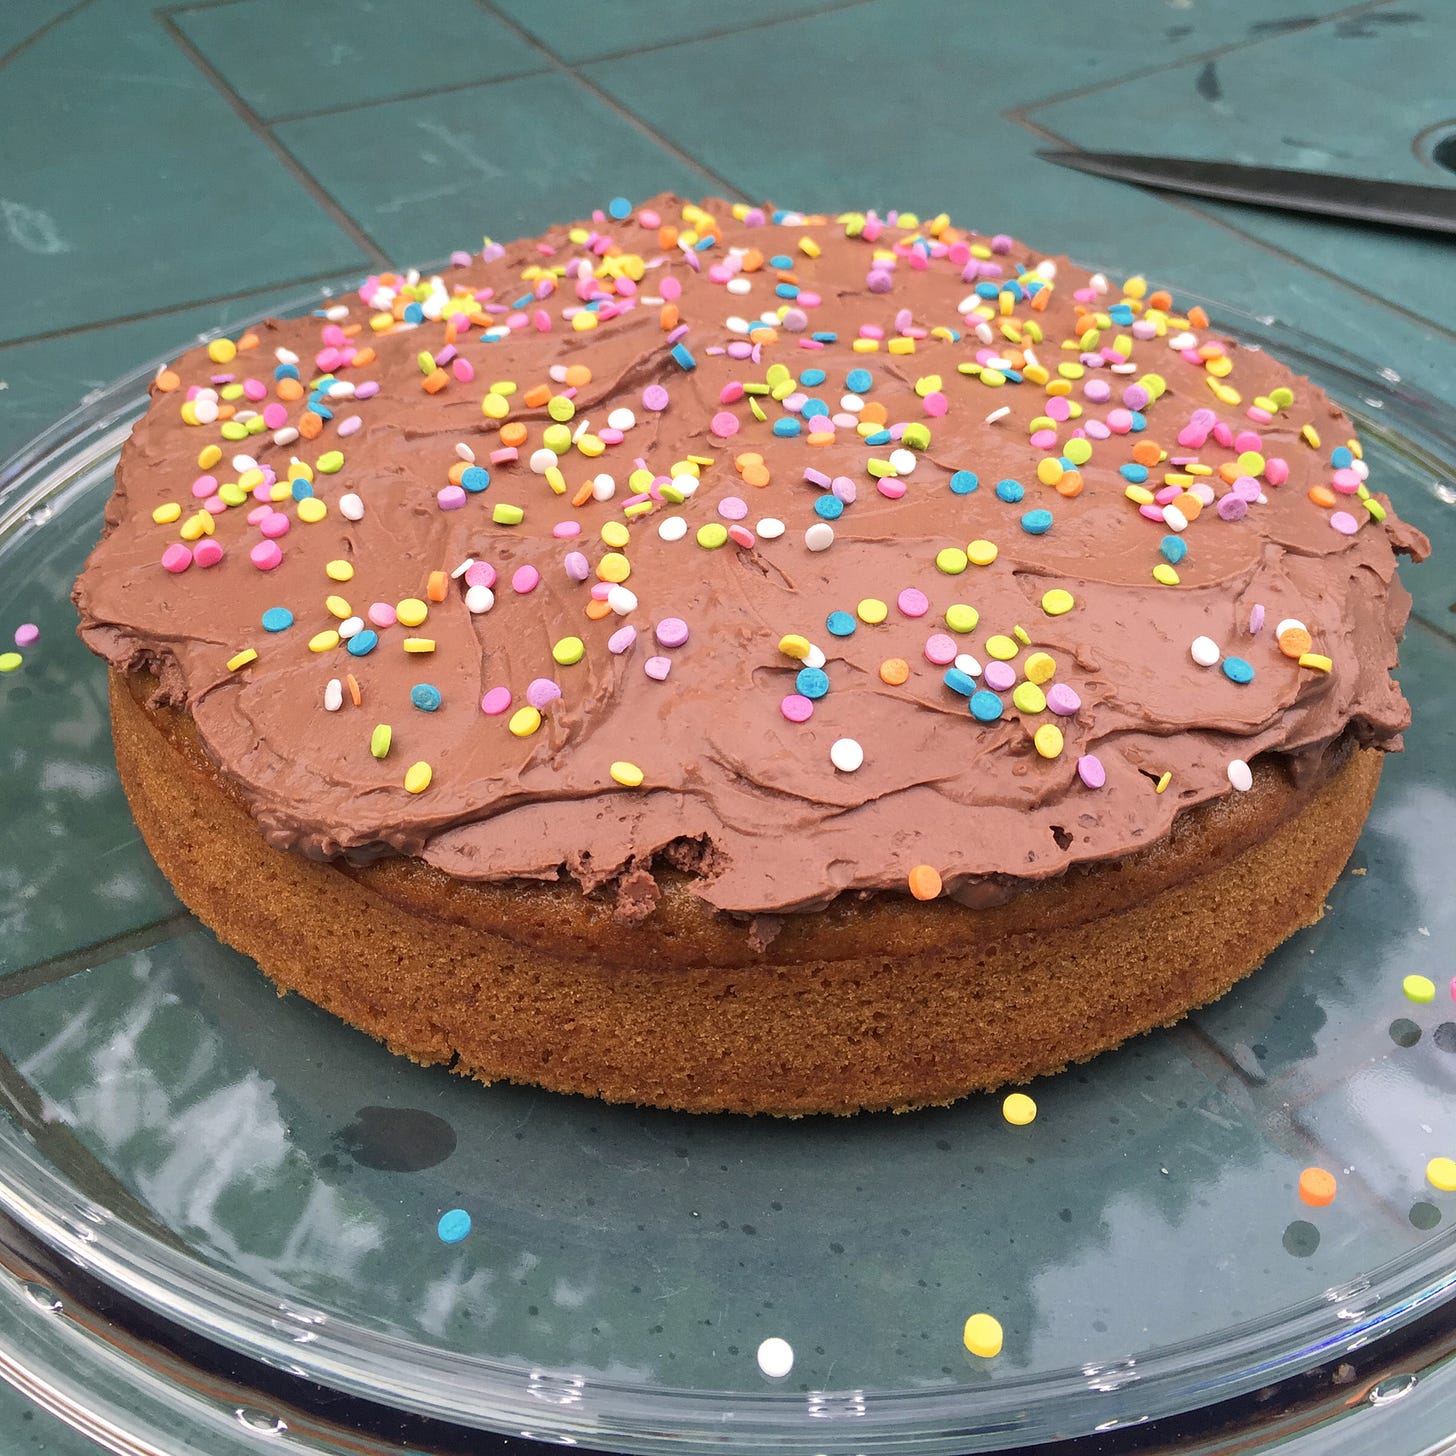 On a green patio table, golden yellow cake with a thick layer of chocolate mousse spread over the top, and large round sprinkles dusted over it. 